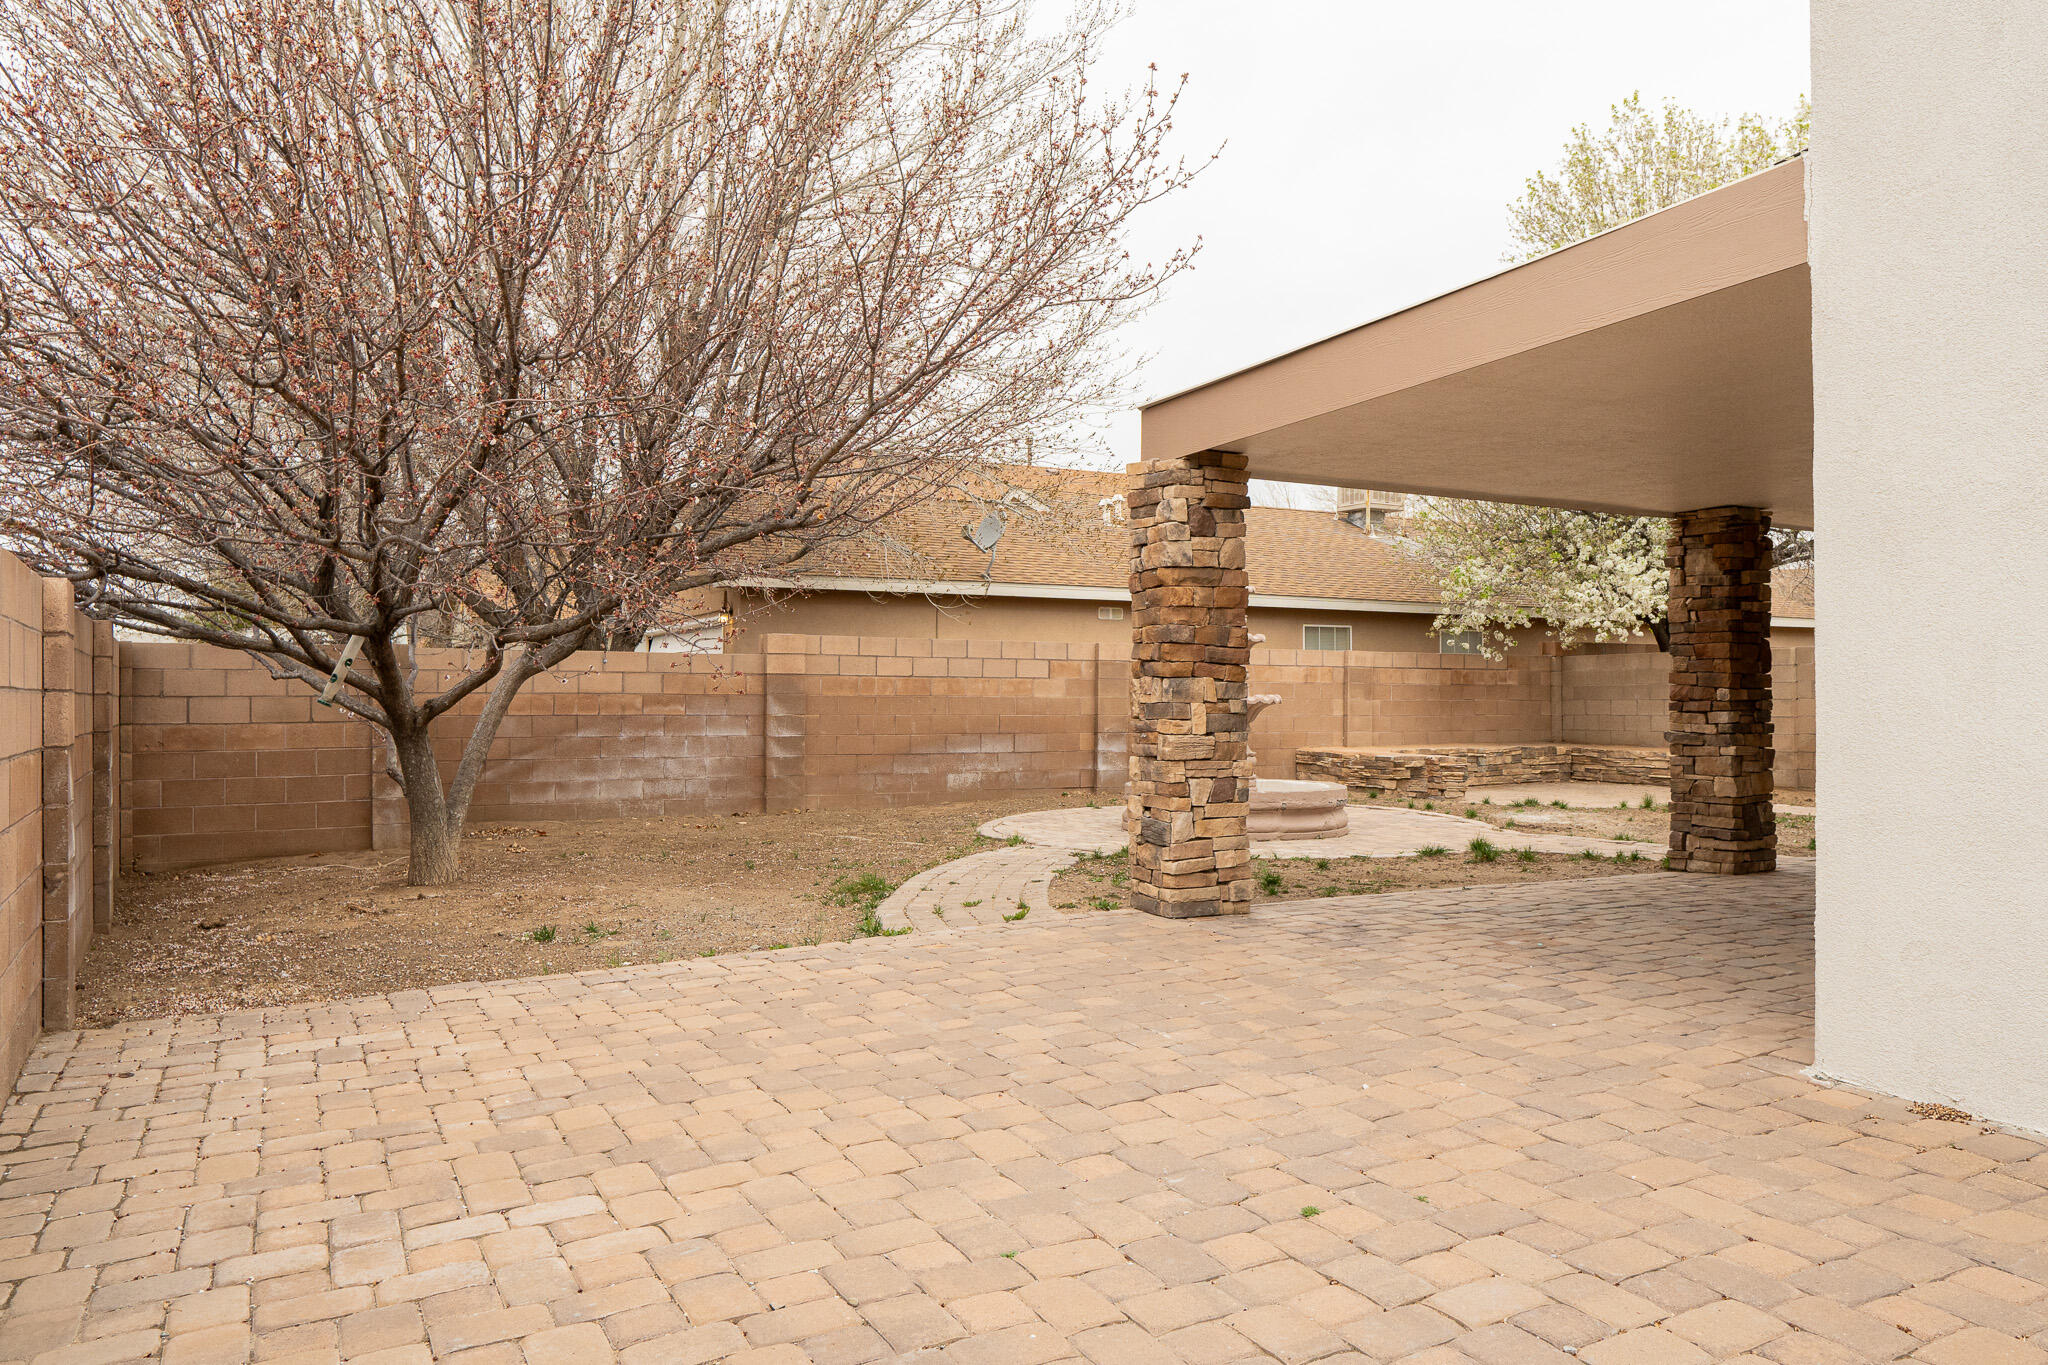 10501 Safford Place NW, Albuquerque, New Mexico 87114, 3 Bedrooms Bedrooms, ,3 BathroomsBathrooms,Residential,For Sale,10501 Safford Place NW,1059519